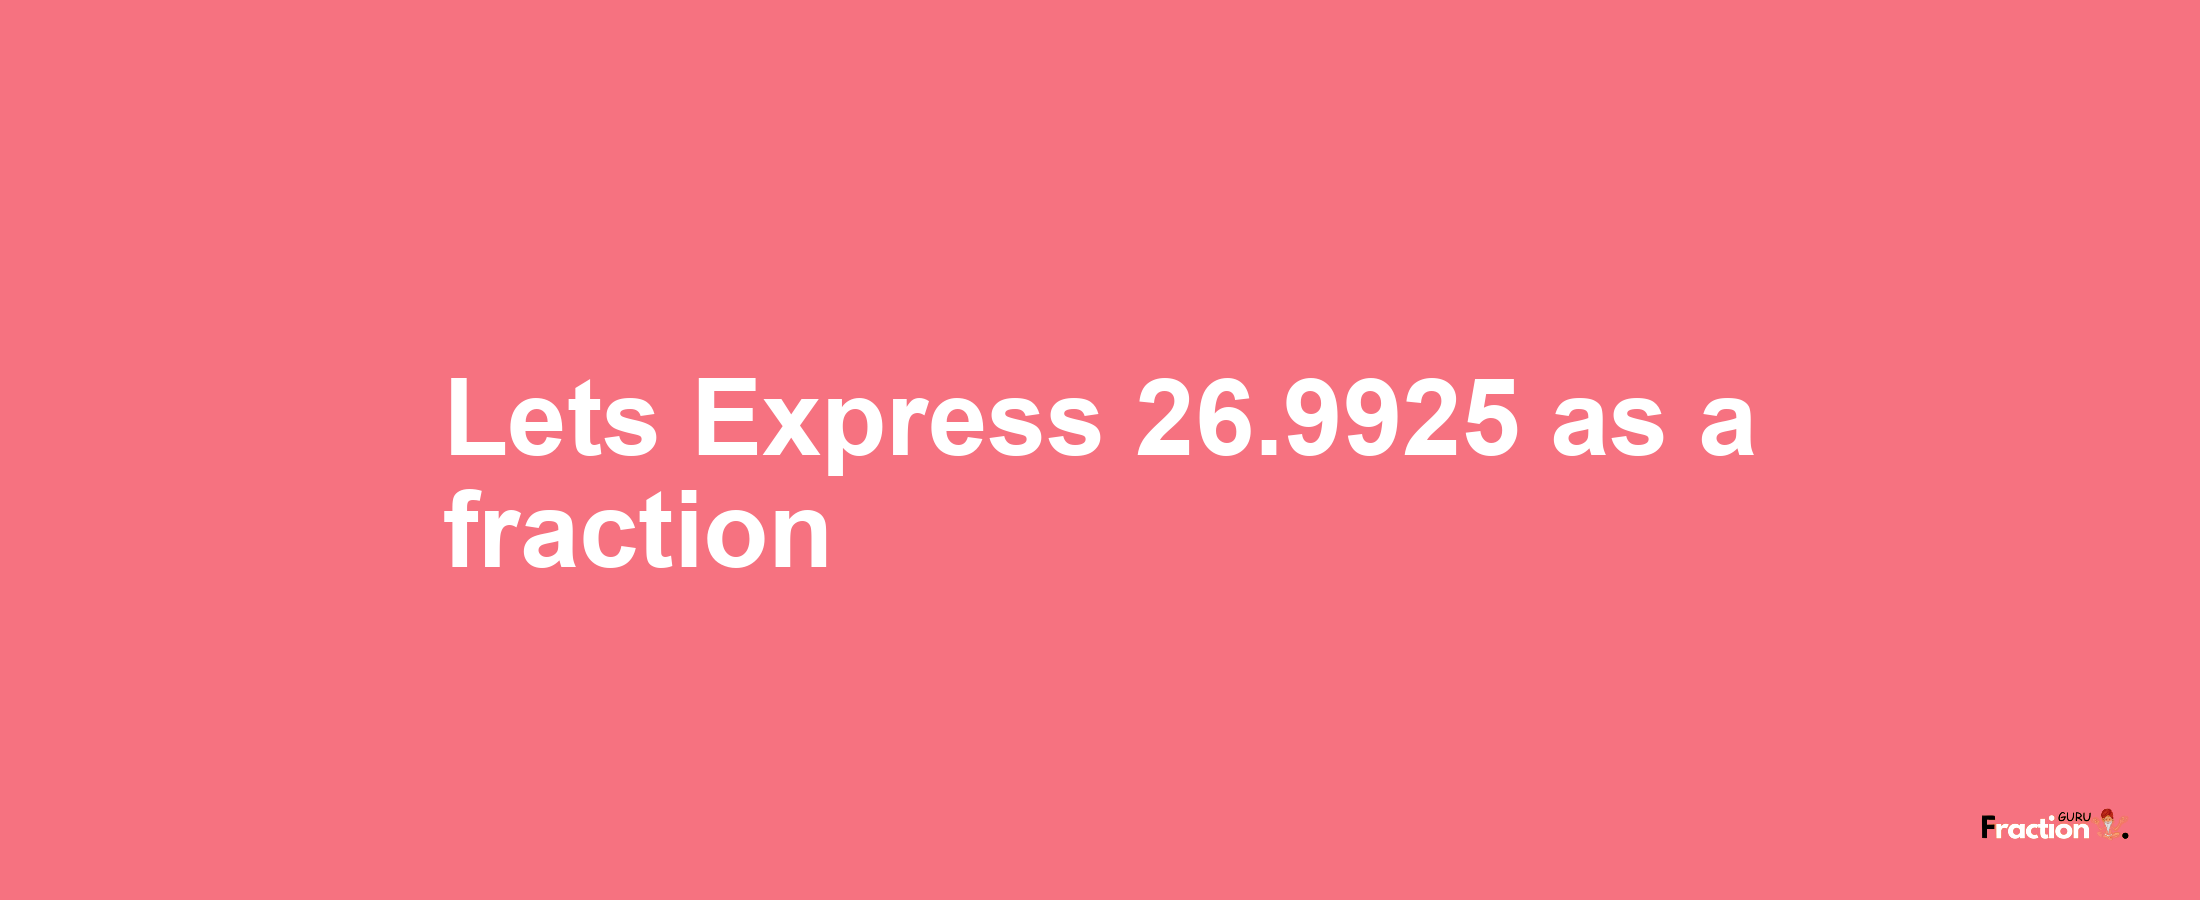 Lets Express 26.9925 as afraction